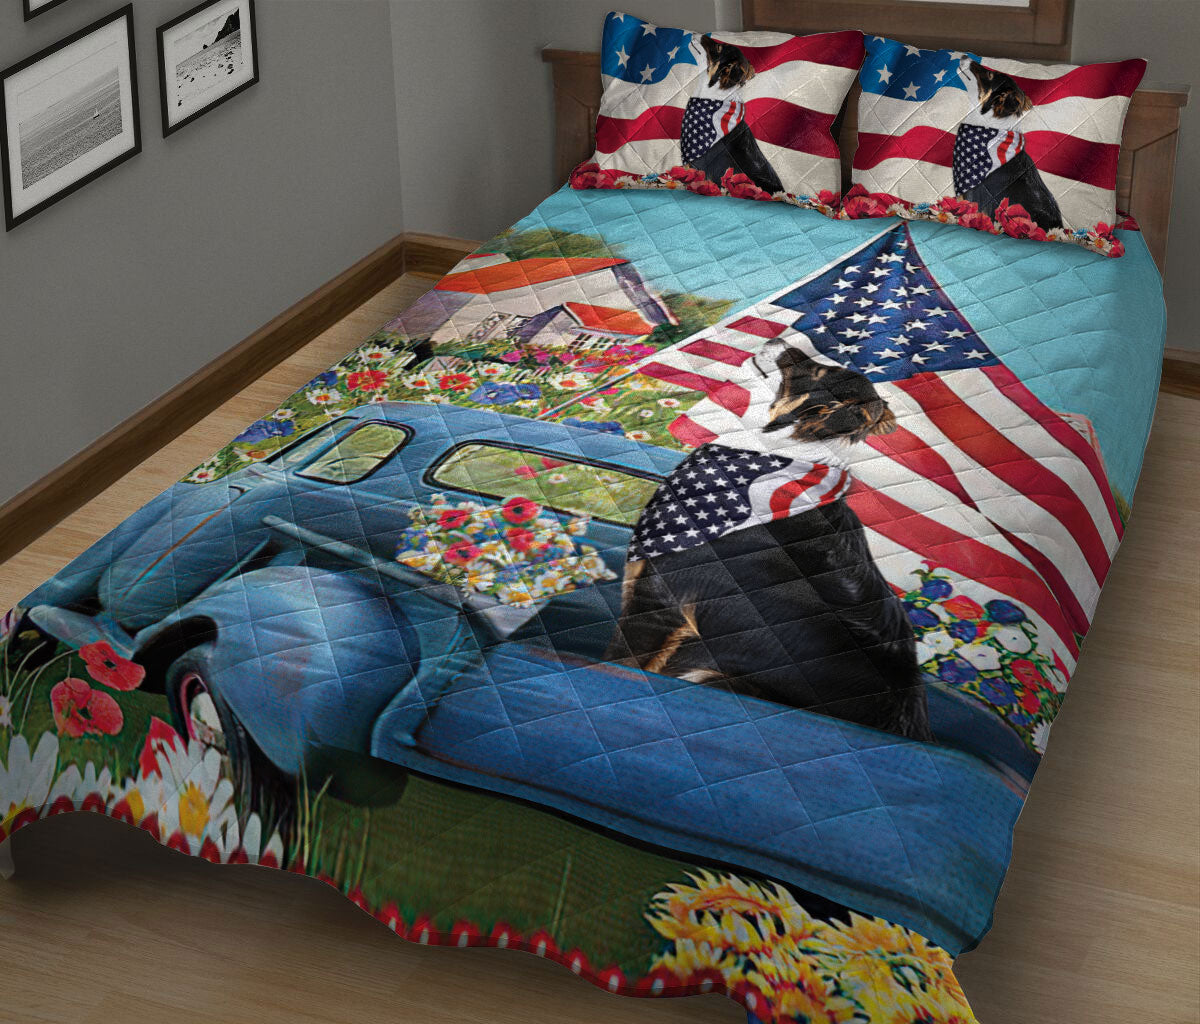 Ohaprints-Quilt-Bed-Set-Pillowcase-Border-Collie-In-Car-Patriotic-Dog-Lover-America-Us-Flag-Flower-Country-Road-Blanket-Bedspread-Bedding-2619-King (90'' x 100'')